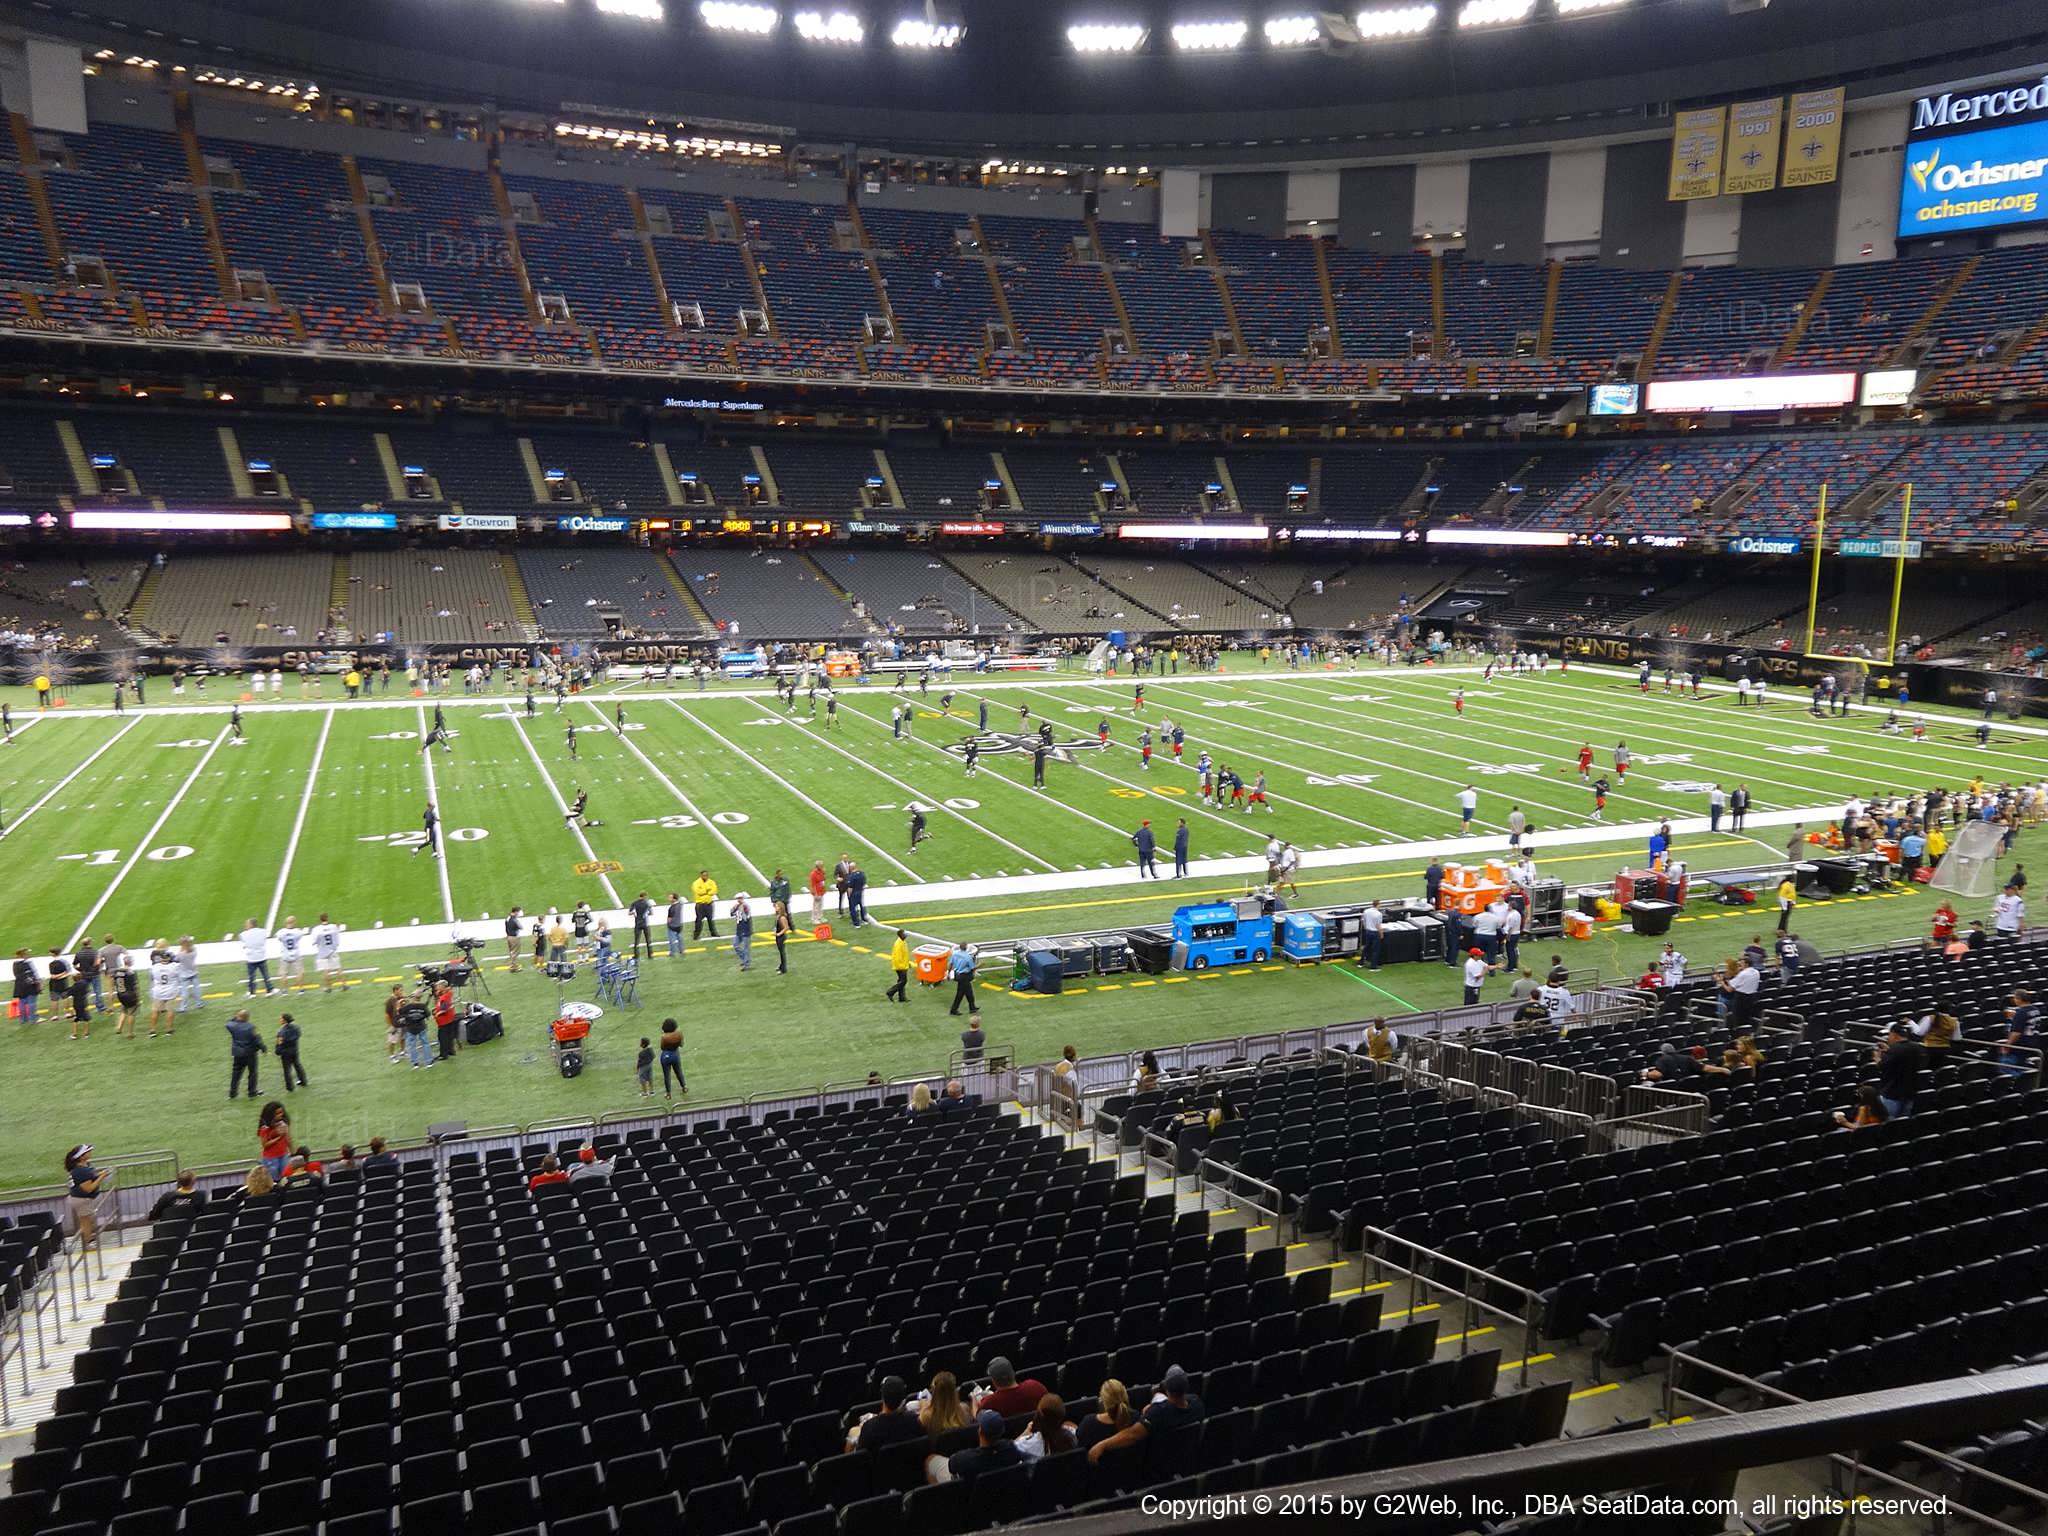 Seat view from section 227 at the Mercedes-Benz Superdome, home of the New Orleans Saints